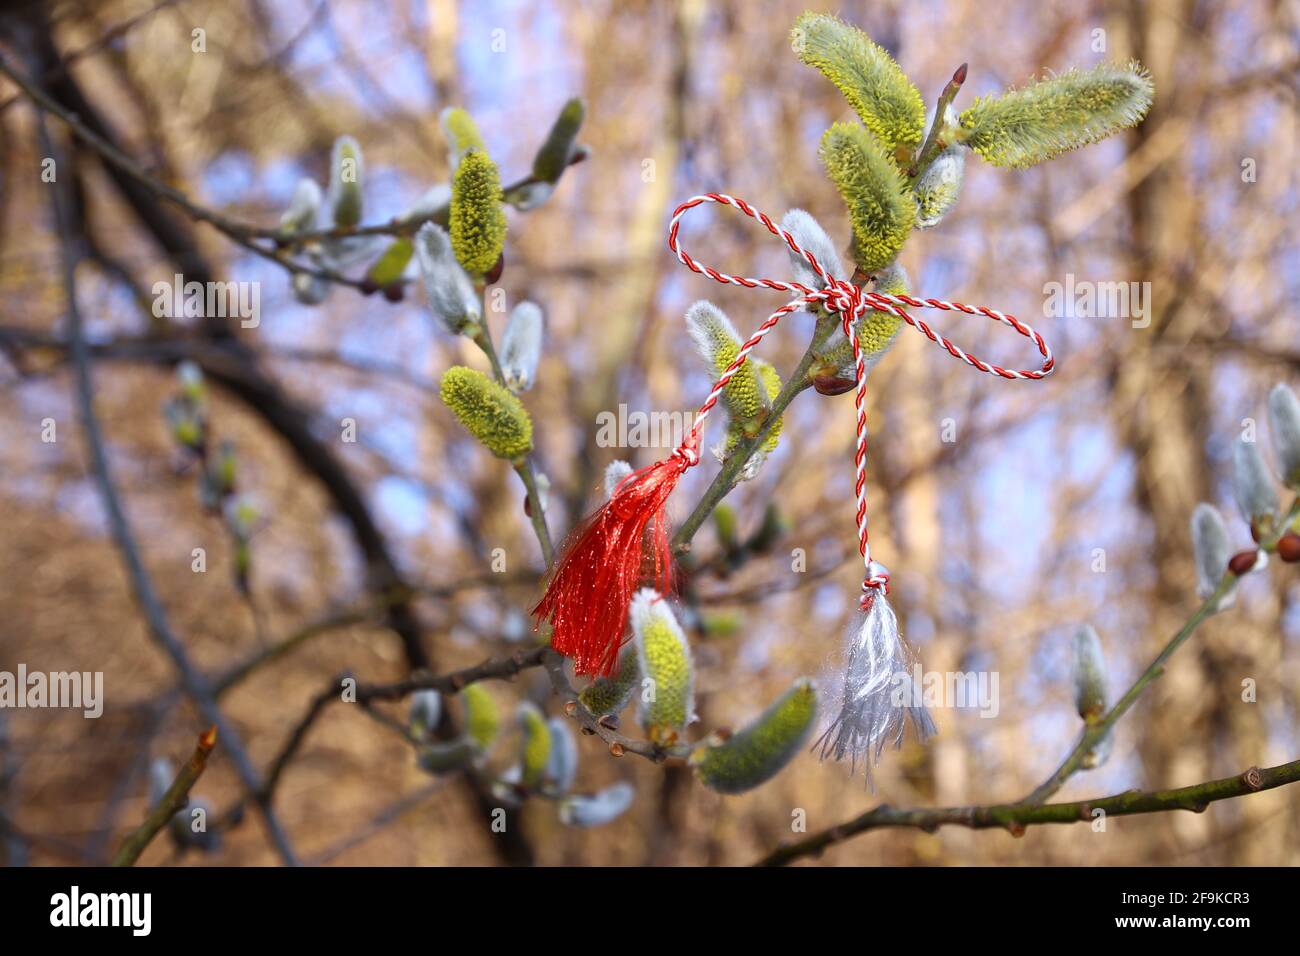 Tree buds in spring. Young large buds on branches against blurred background. Stock Photo